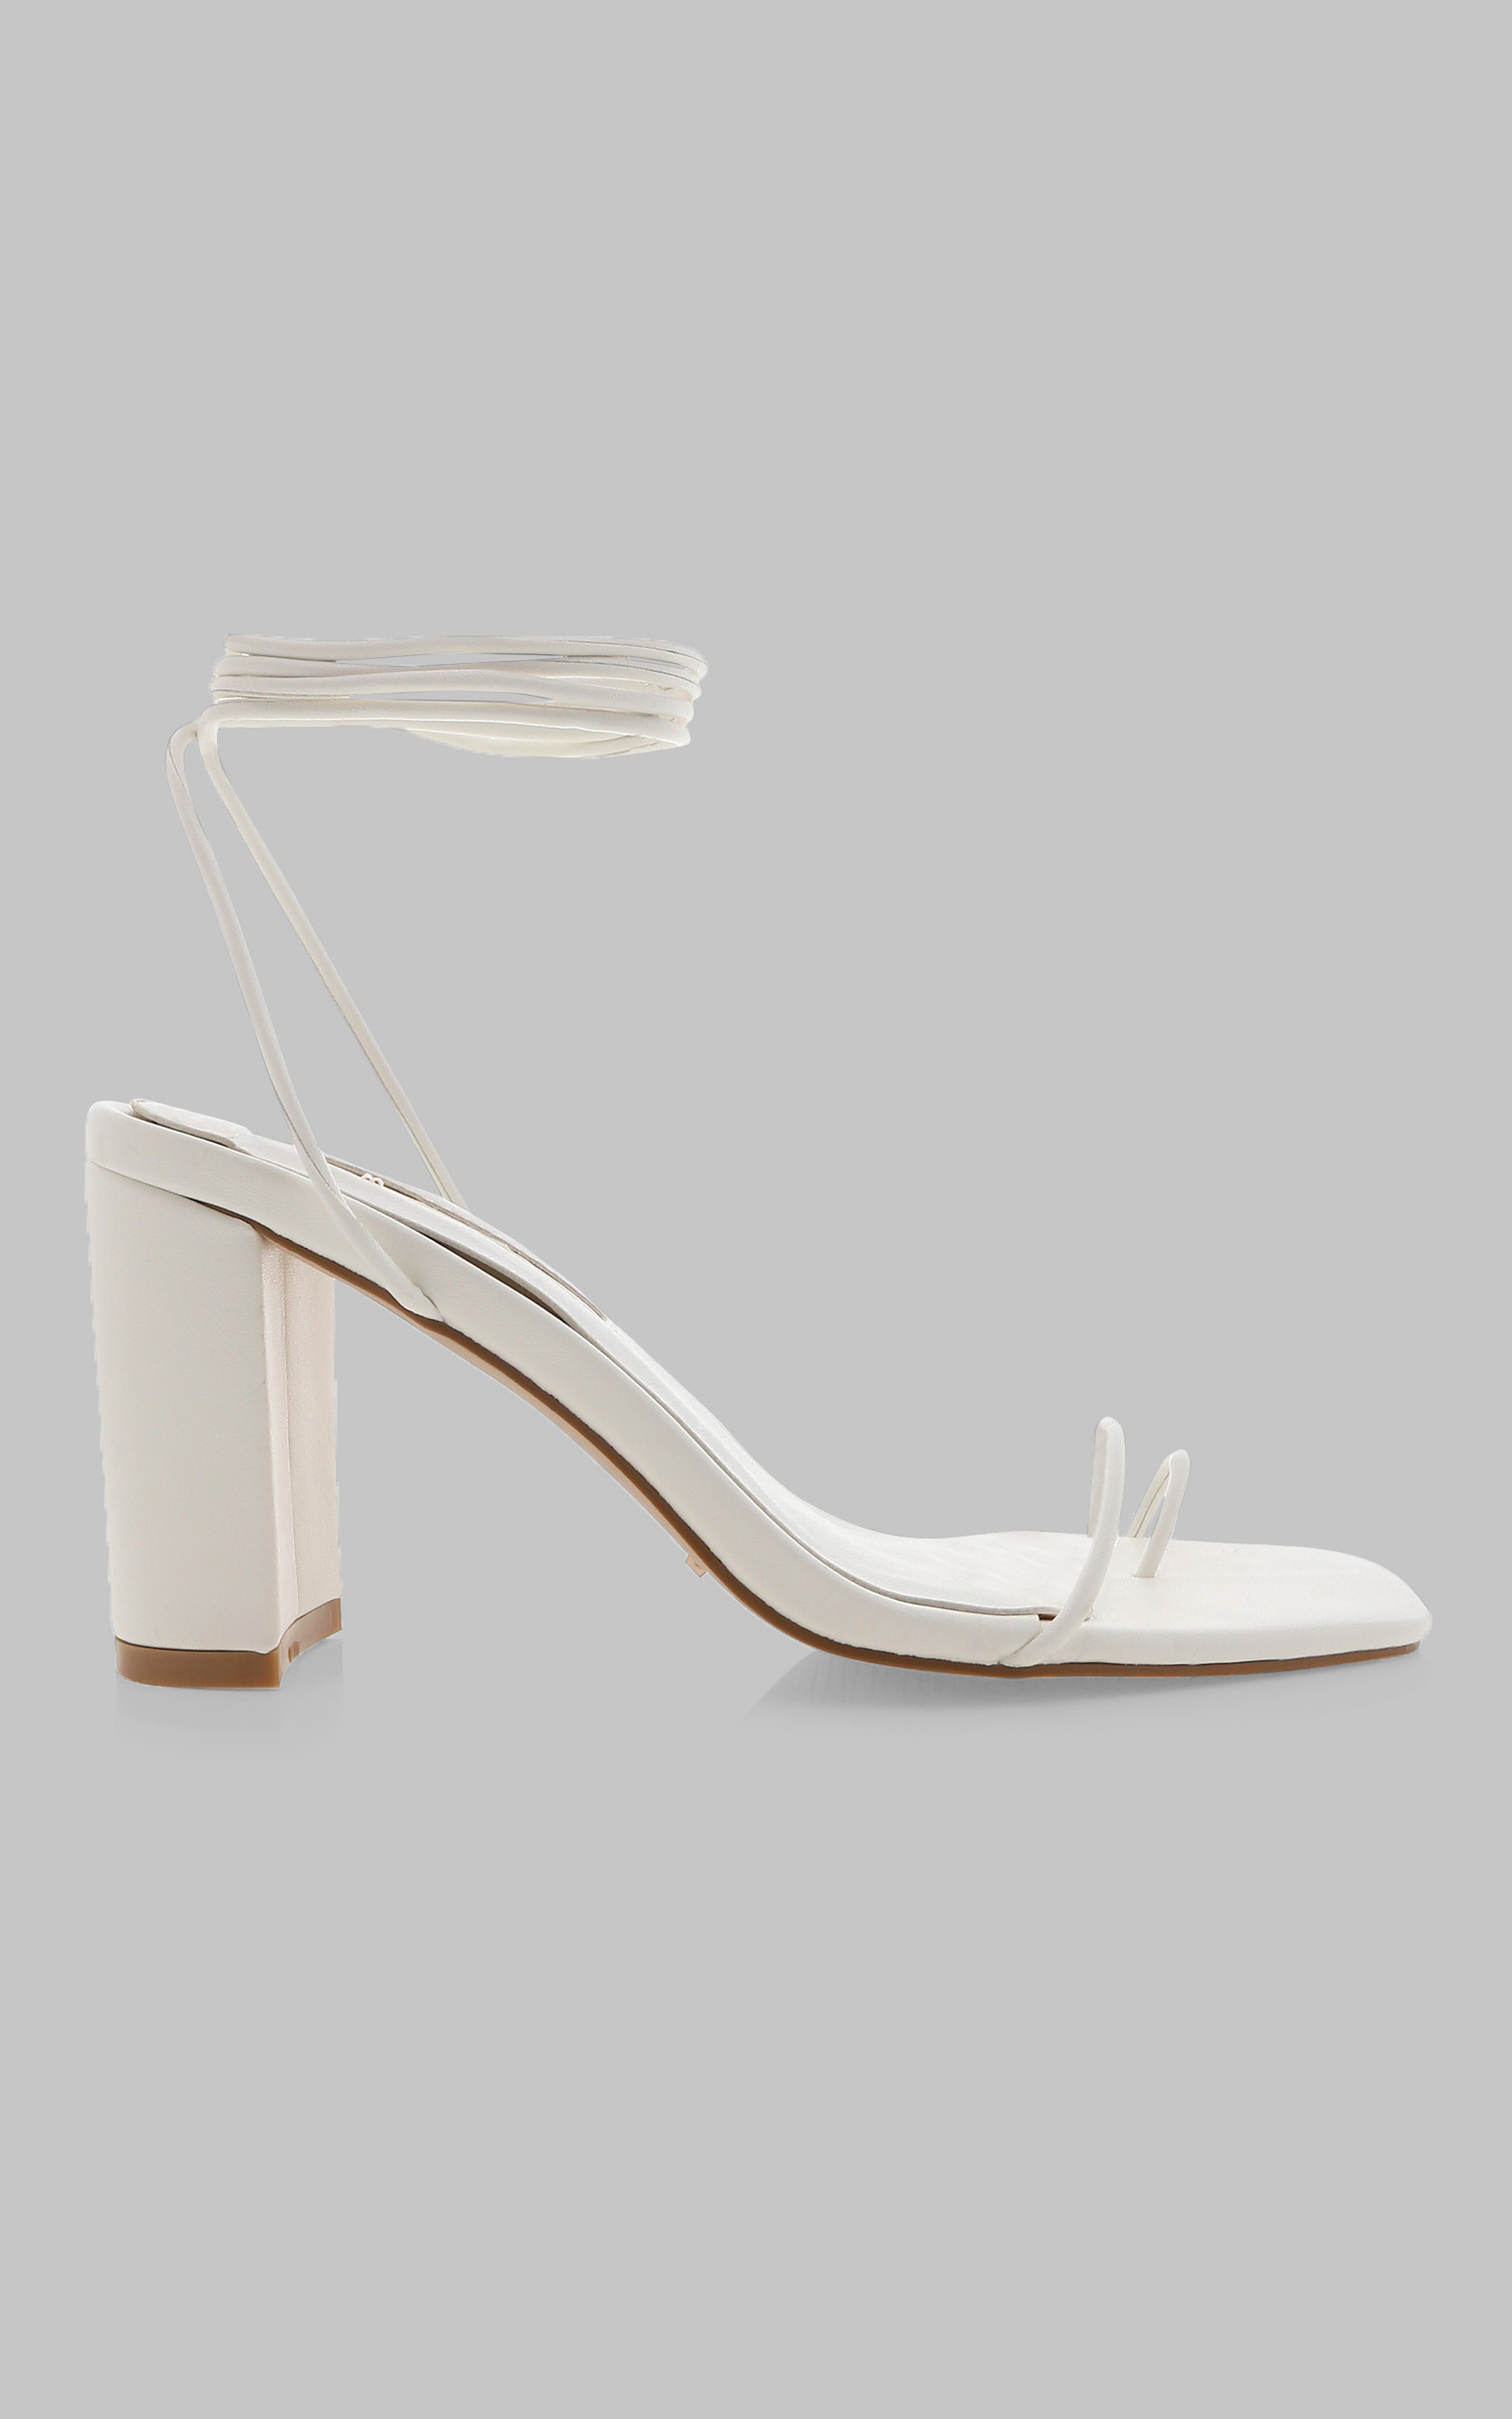 Billini - Cairns Heels in White - 05, WHT2, hi-res image number null